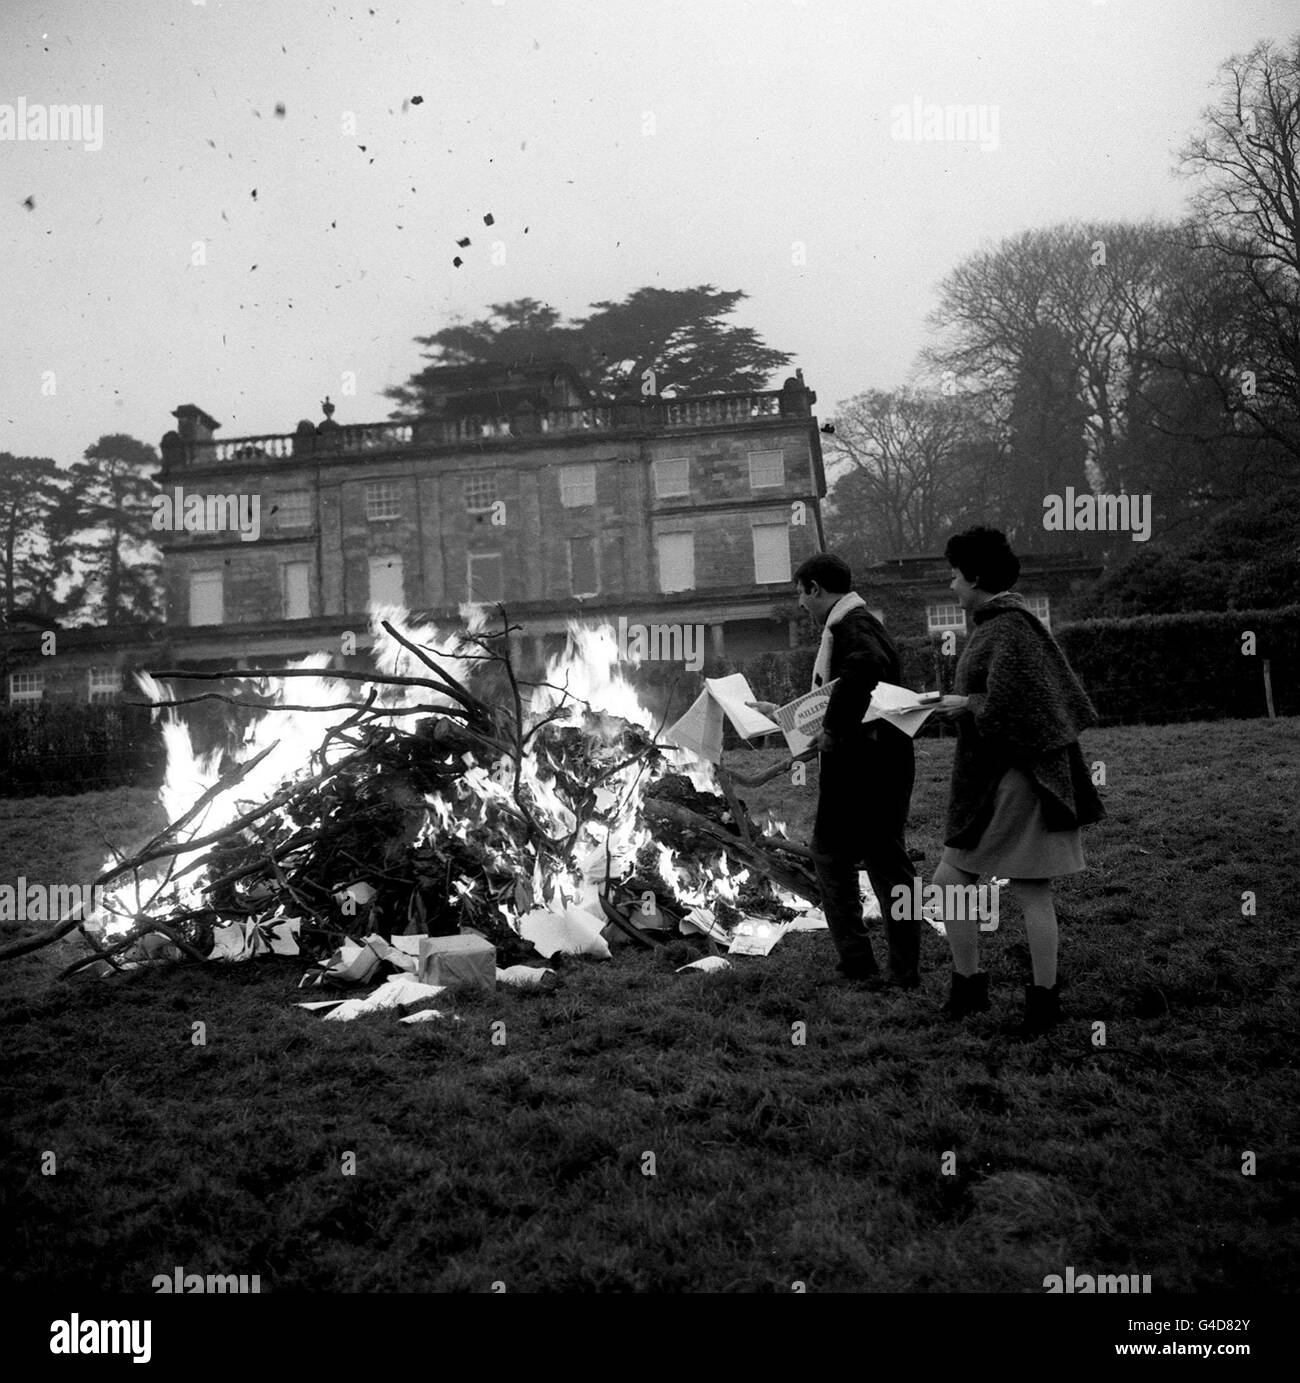 PA NEWS PHOTO 29/11/68 THE CHURCH OF SCIENTOLOGY HAD A BONFIRE PARTY IN THE GROUNDS OF SAINT HILL MANOR, THEIR HEADQUARTERS AT EAST GRINSTEAD, SUSSEX. DAVID GAIMAN, HEAD OF THE SCIENTOLOGISTS ' PUBLIC RELATIONS BUREAU PICTURED WITH JANE KEMBER, DEPUTY GUARDIAN OF WORLD WIDE ORGANISATION OF THE CHURCH OF SCIENTOLOGY SEEN HERE BURNING DOCUMENTS IN THE BONFIRE Stock Photo